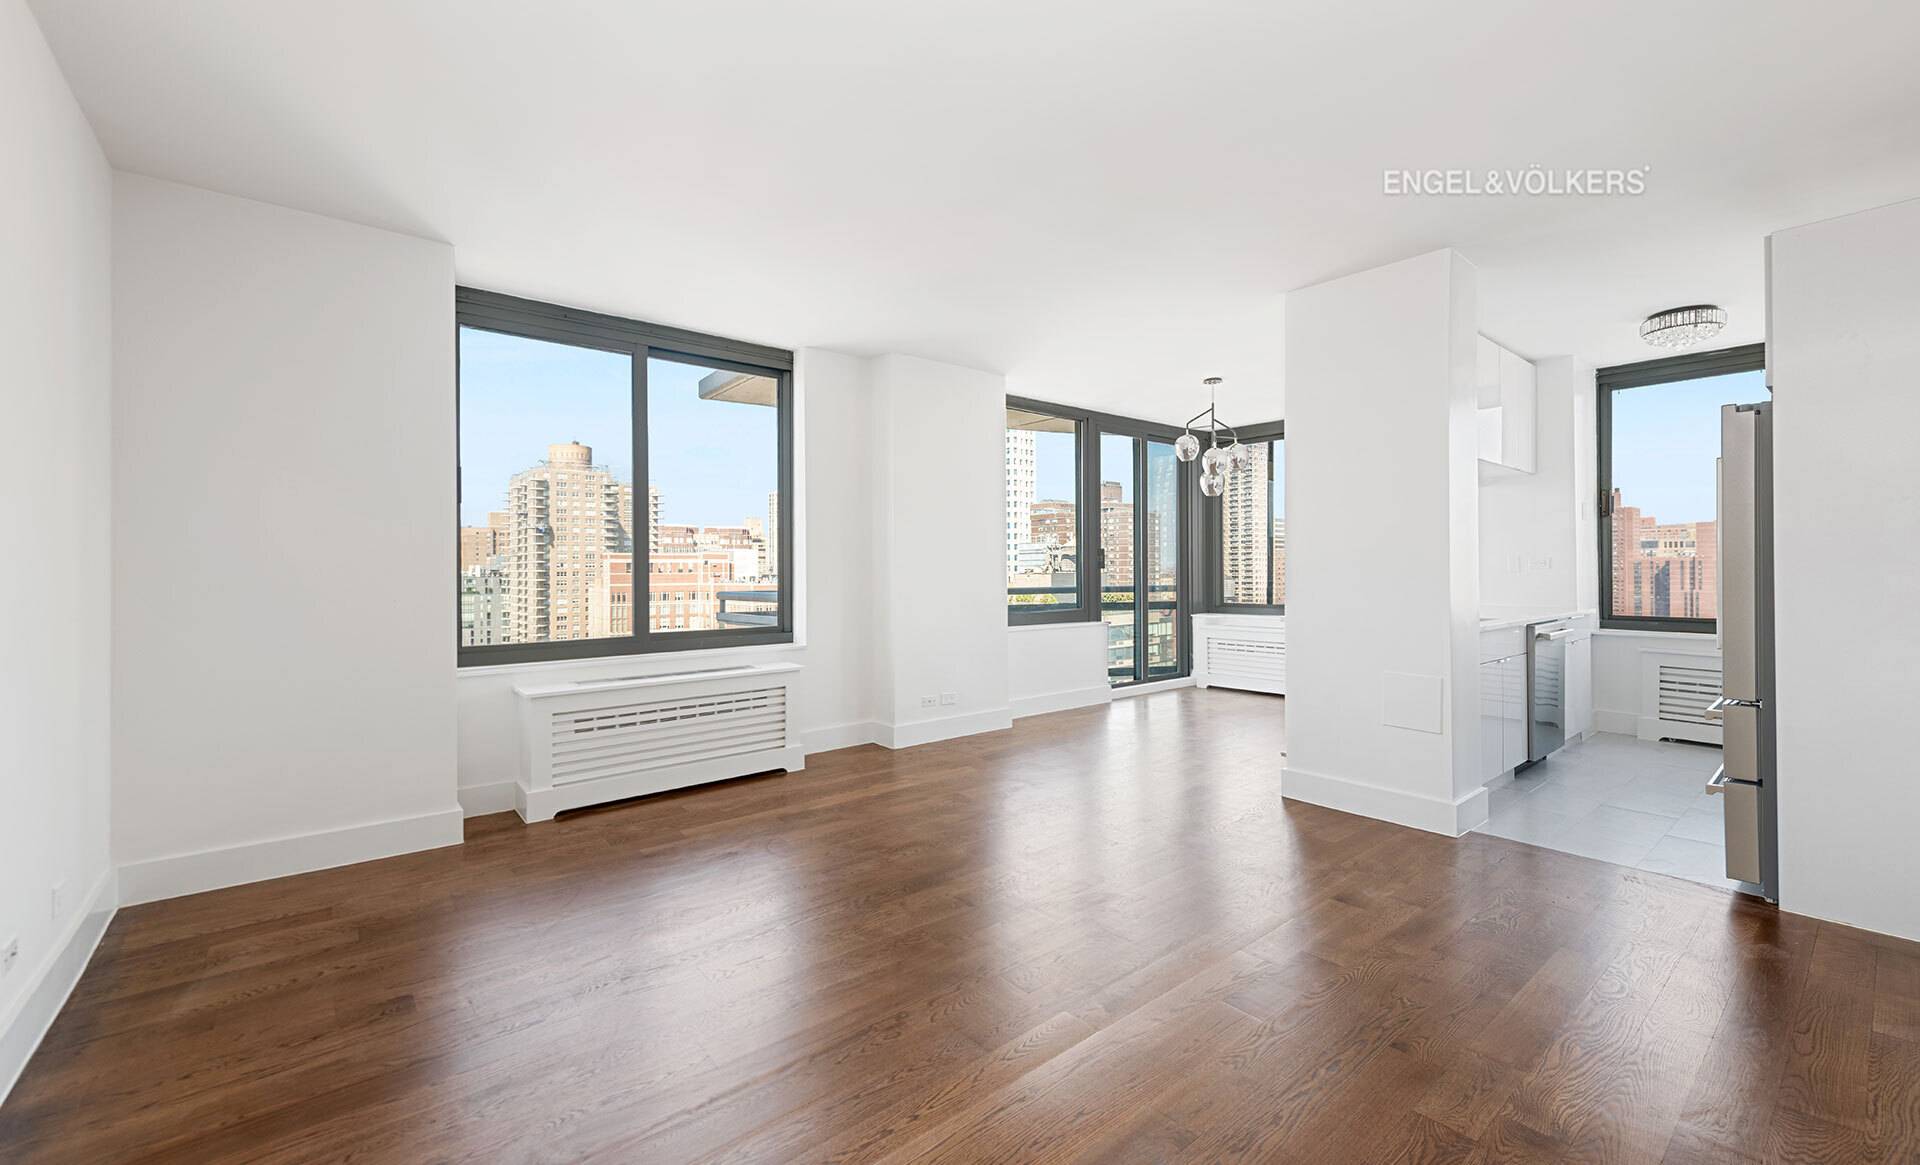 Located in a full service white glove Condop, this pristine two bedroom residence showcases a remarkable renovation and offers breathtaking, unobstructed views from every room.